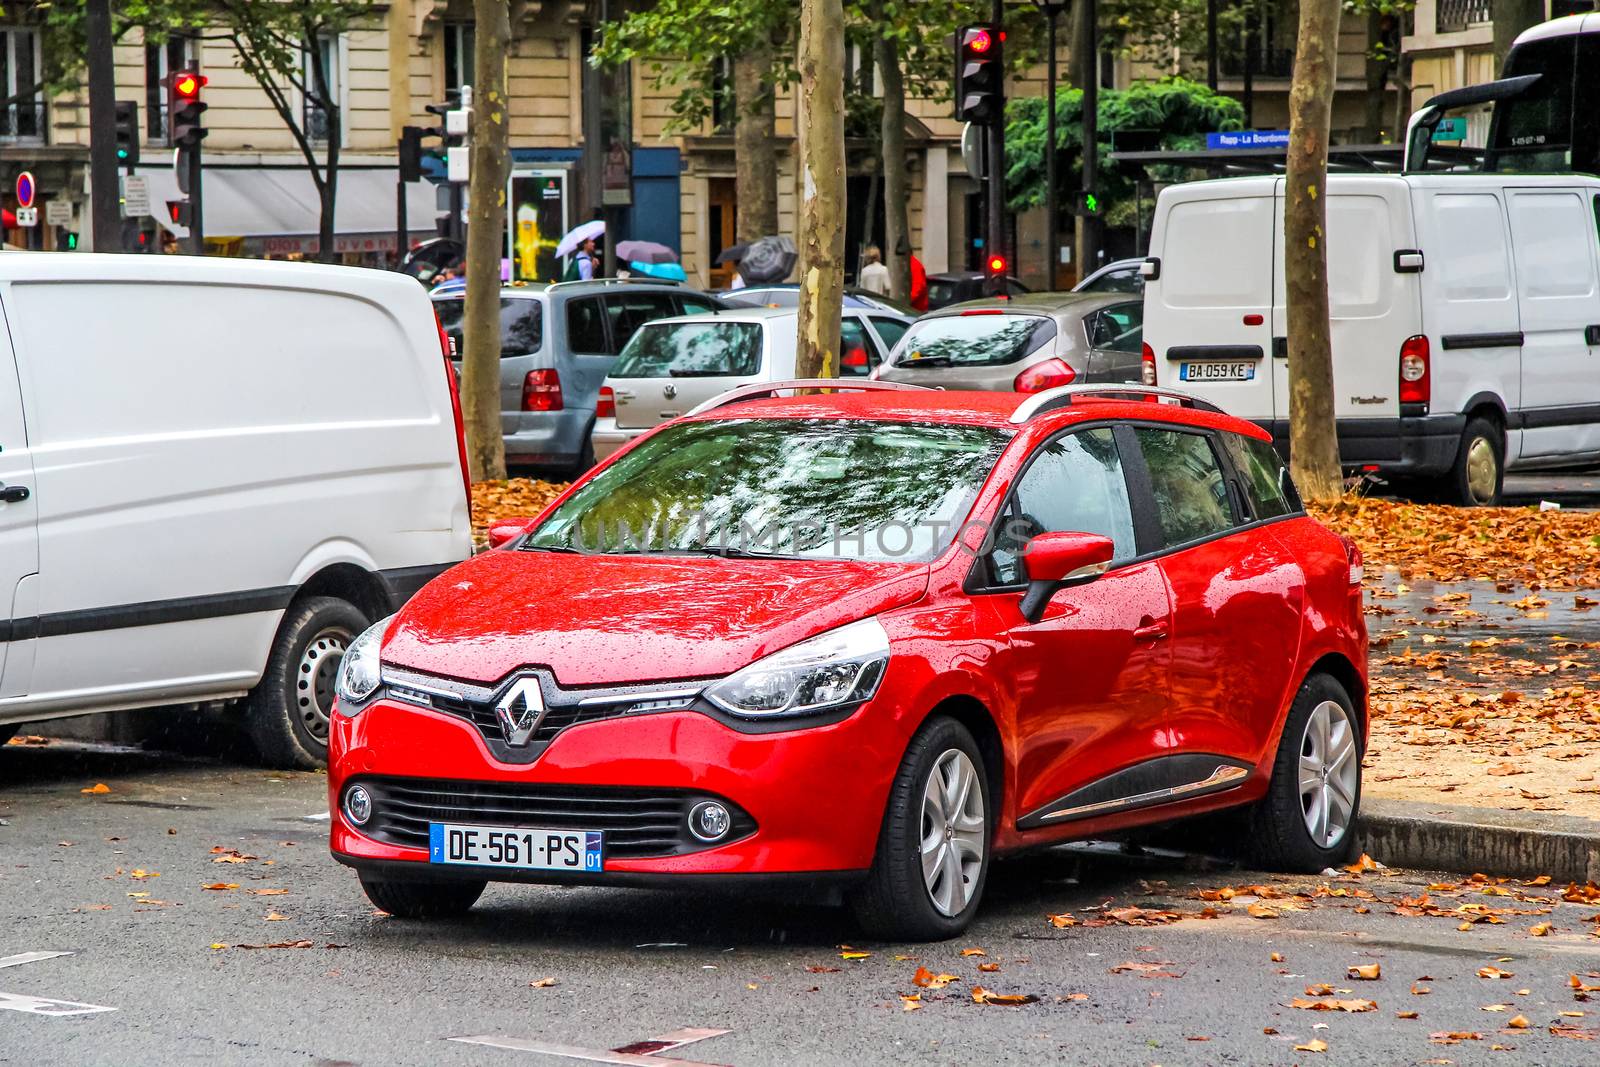 PARIS, FRANCE - AUGUST 8, 2014: Motor car Renault Clio at the city street.